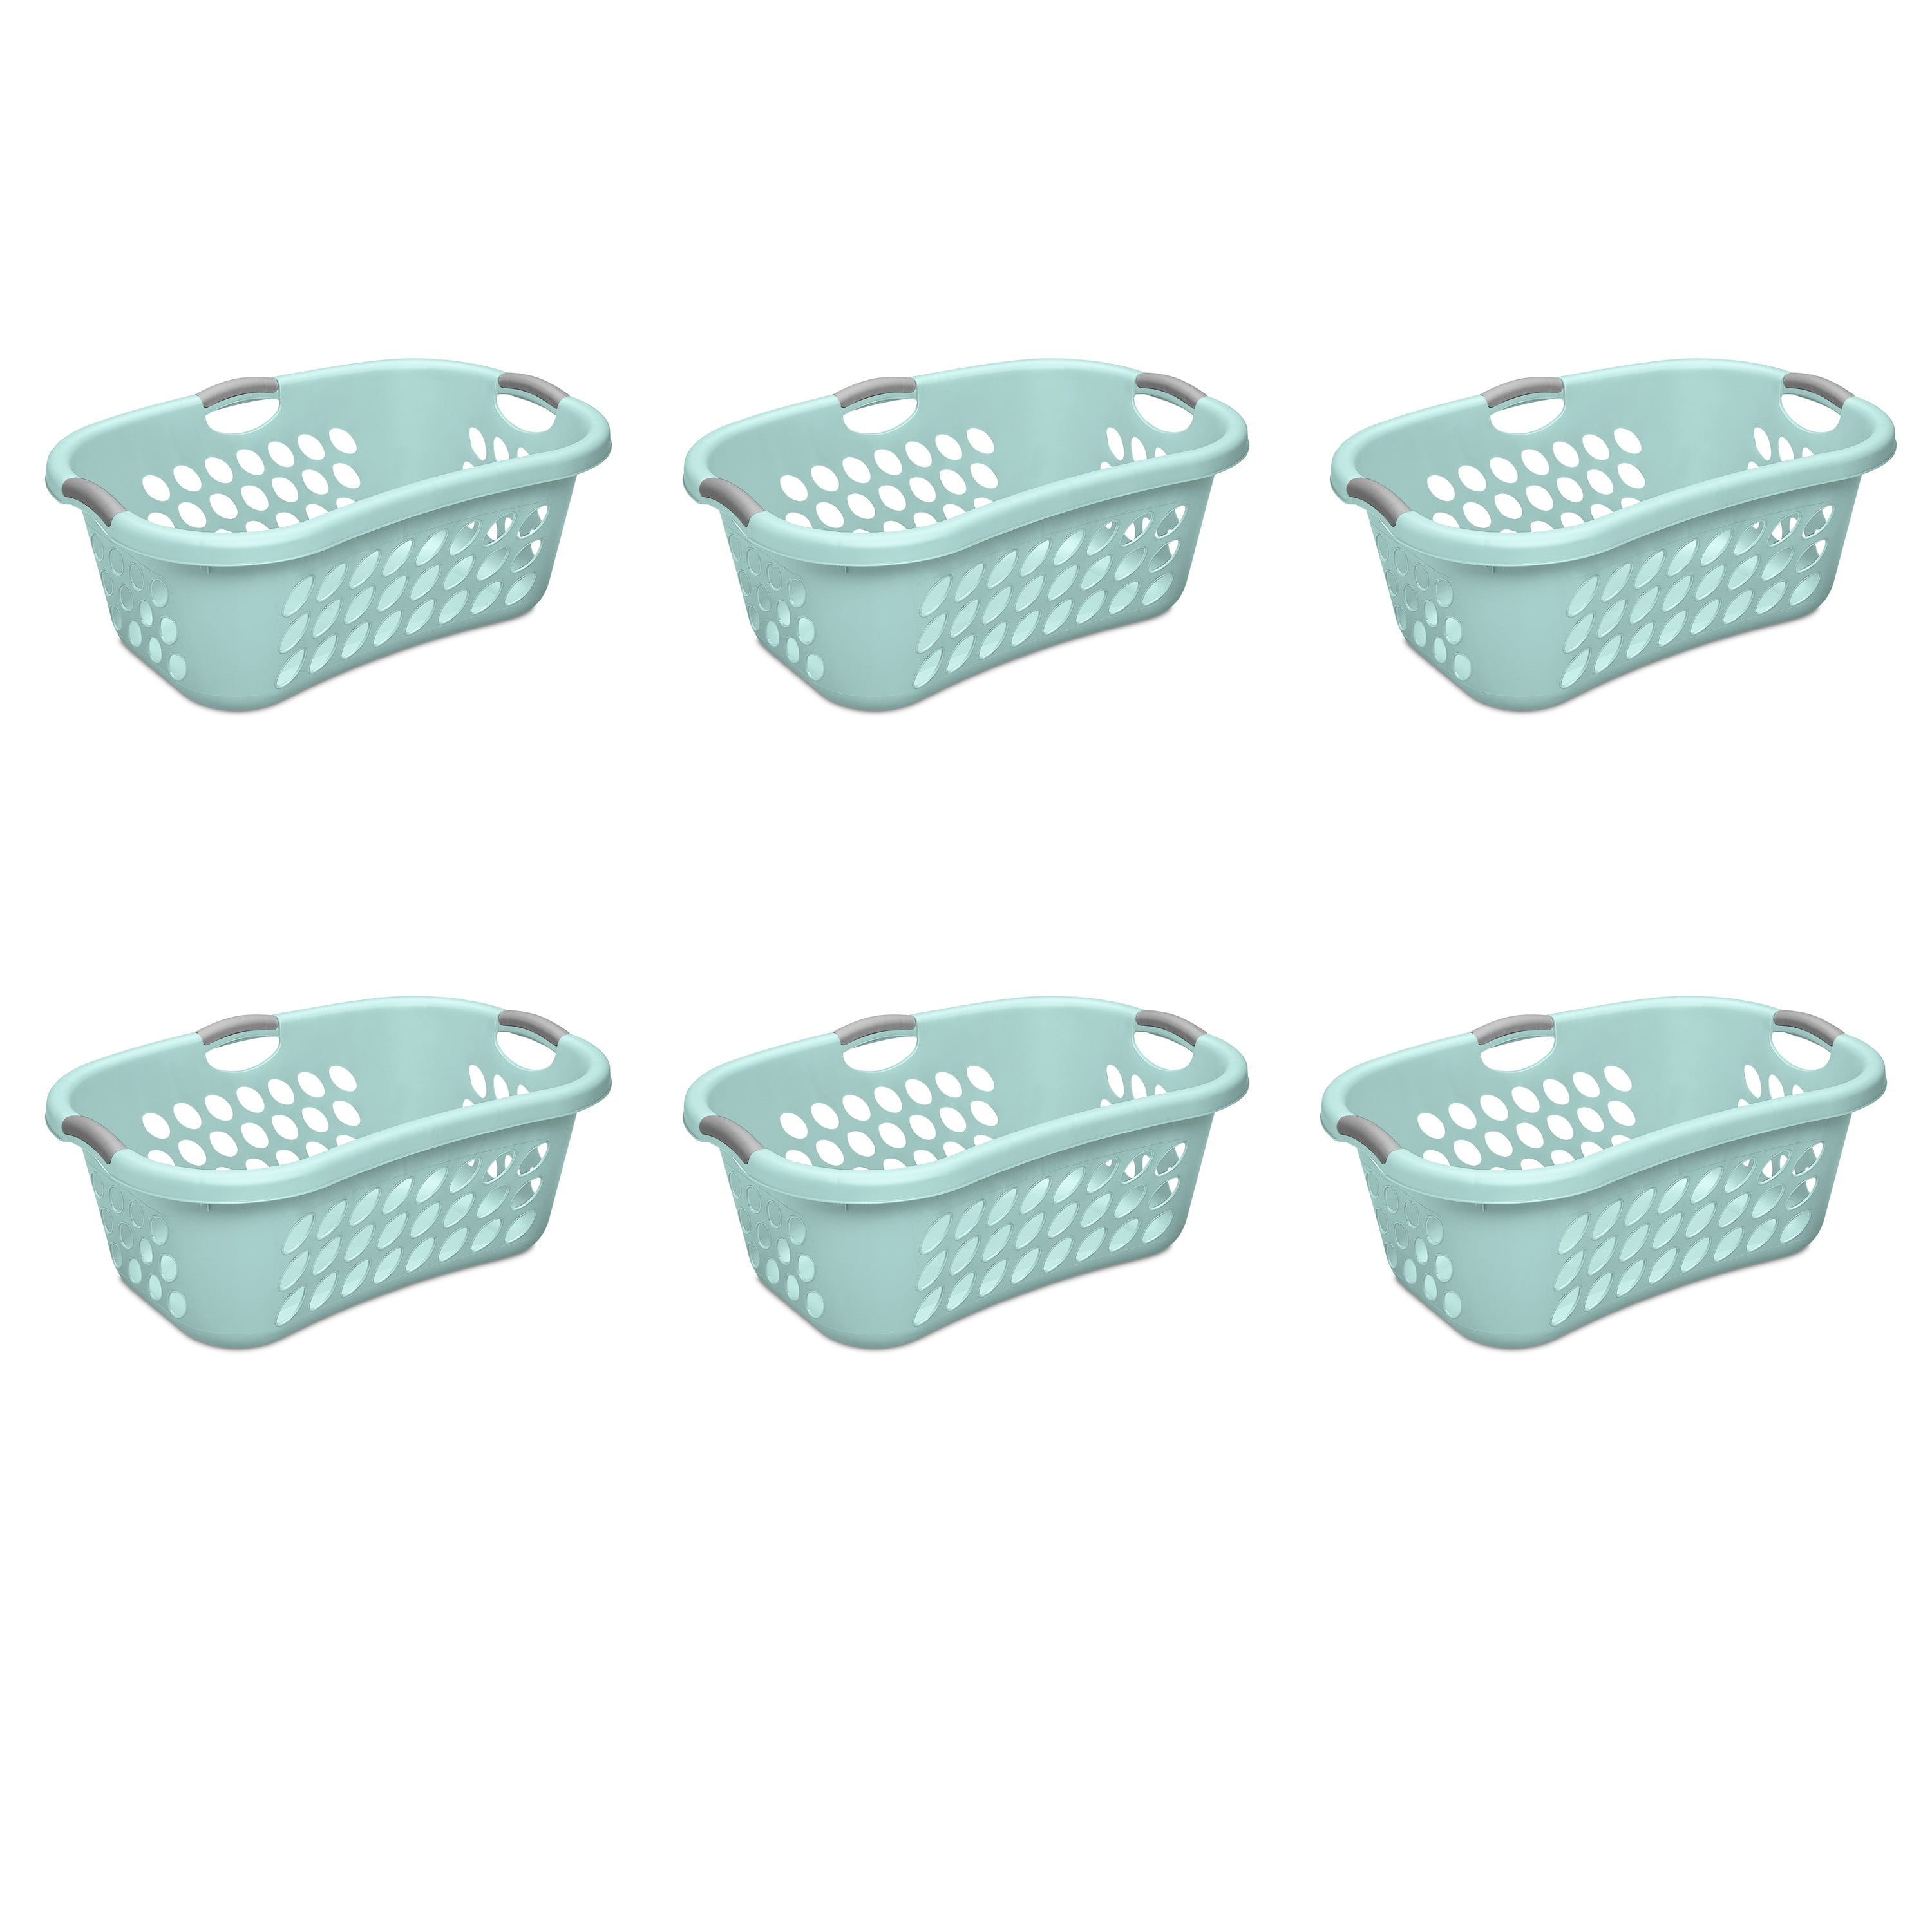 Homeika 42L (11 Gallon) Collapsible Plastic Laundry Basket - Foldable Pop Up Storage Container/Organizer - Portable Washing Tub - Space Saving Hamper/